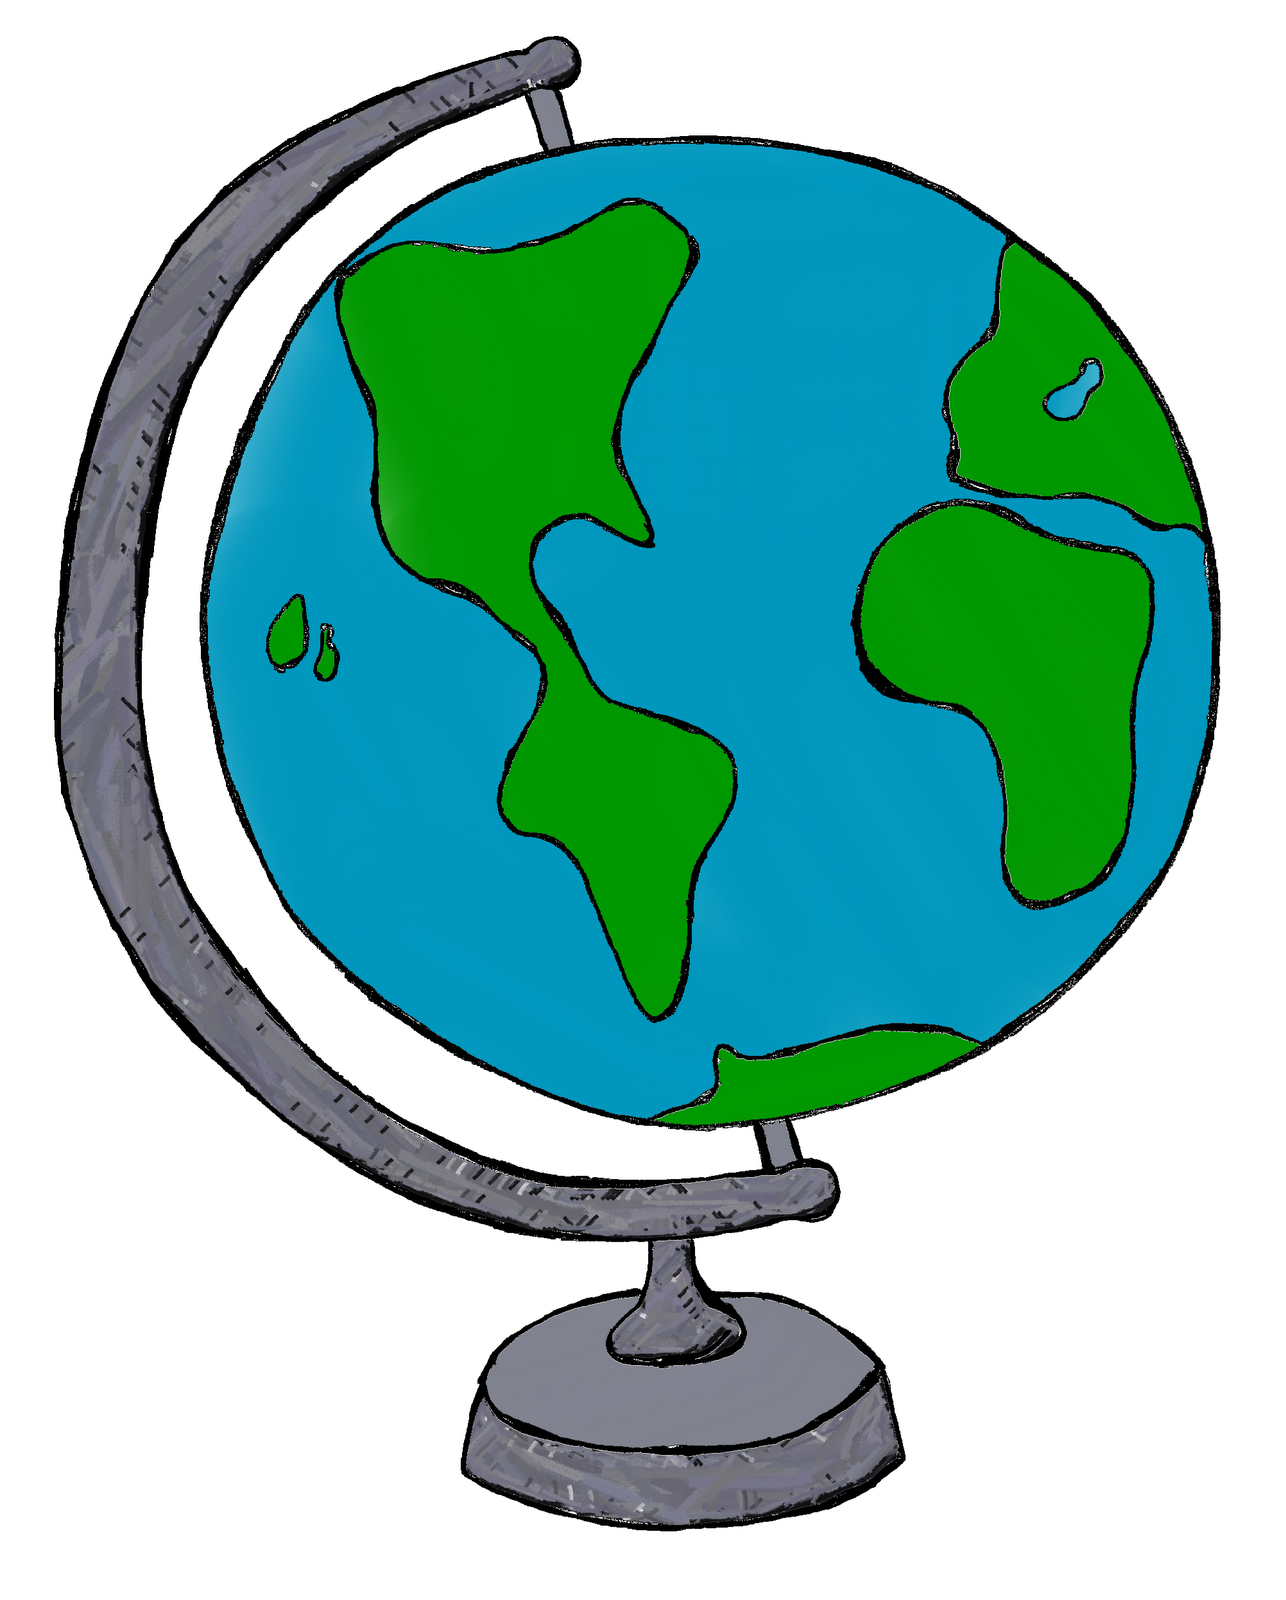 Globe earth clipart black and white free clipart images 2